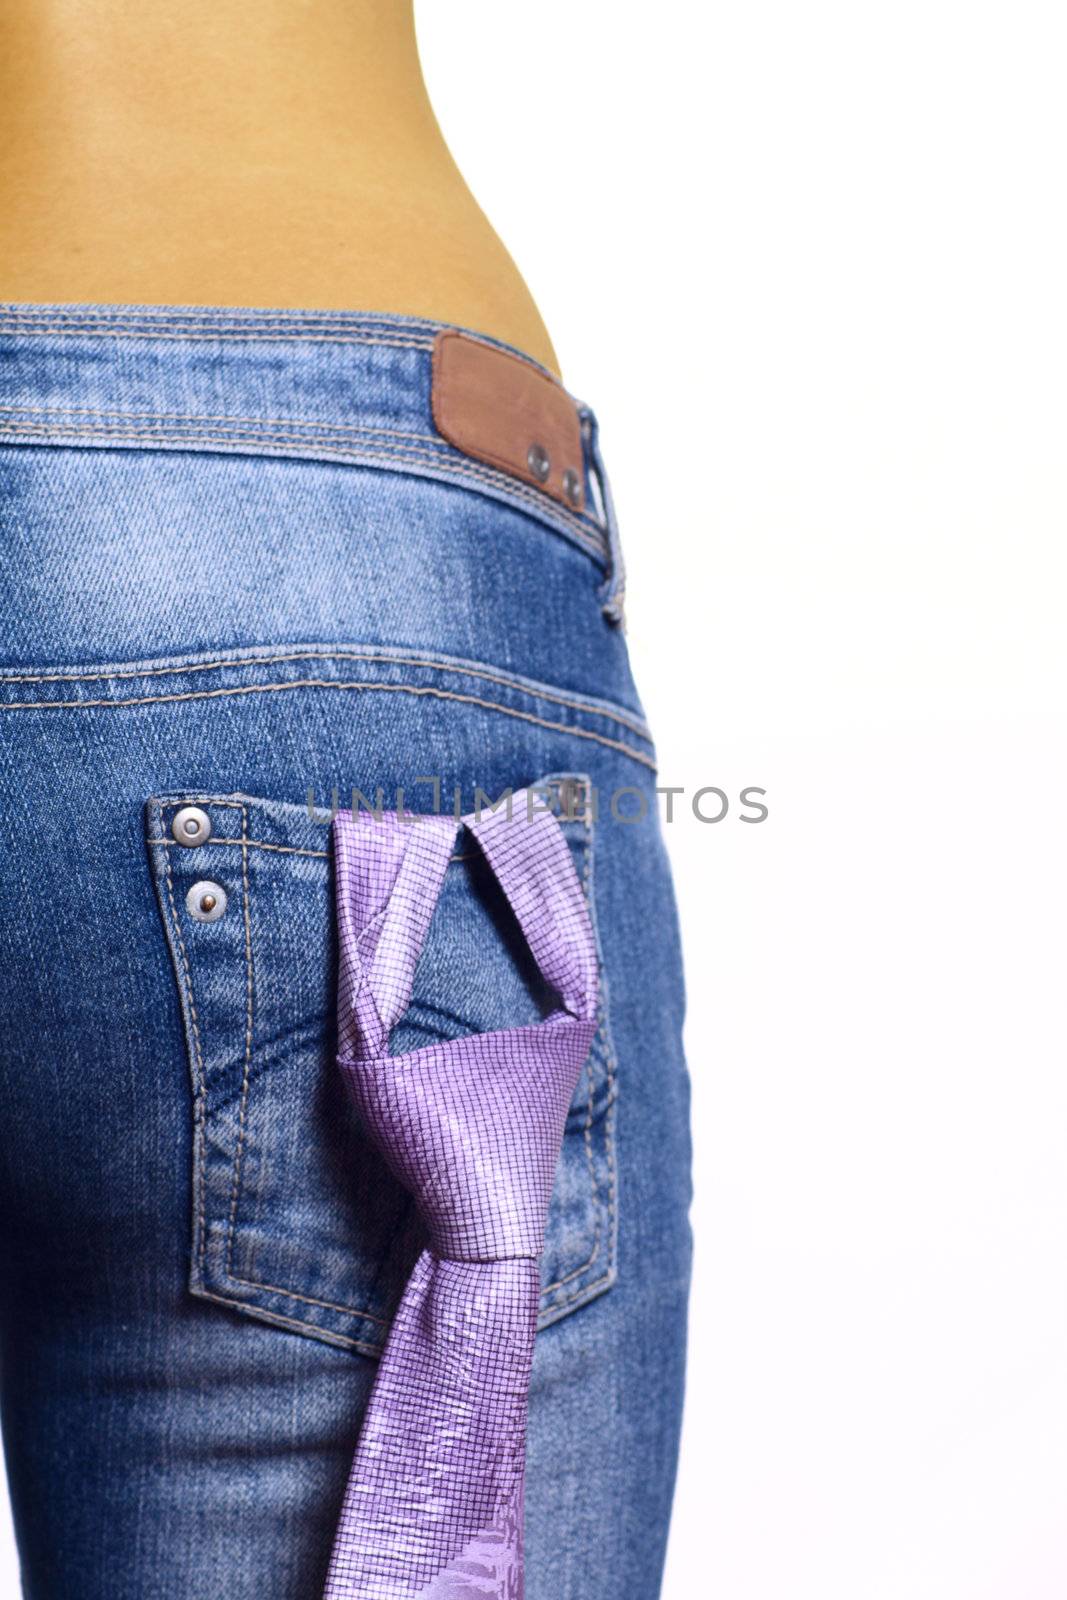 The girl in jeans with the fastened tie in a pocket removed from a back